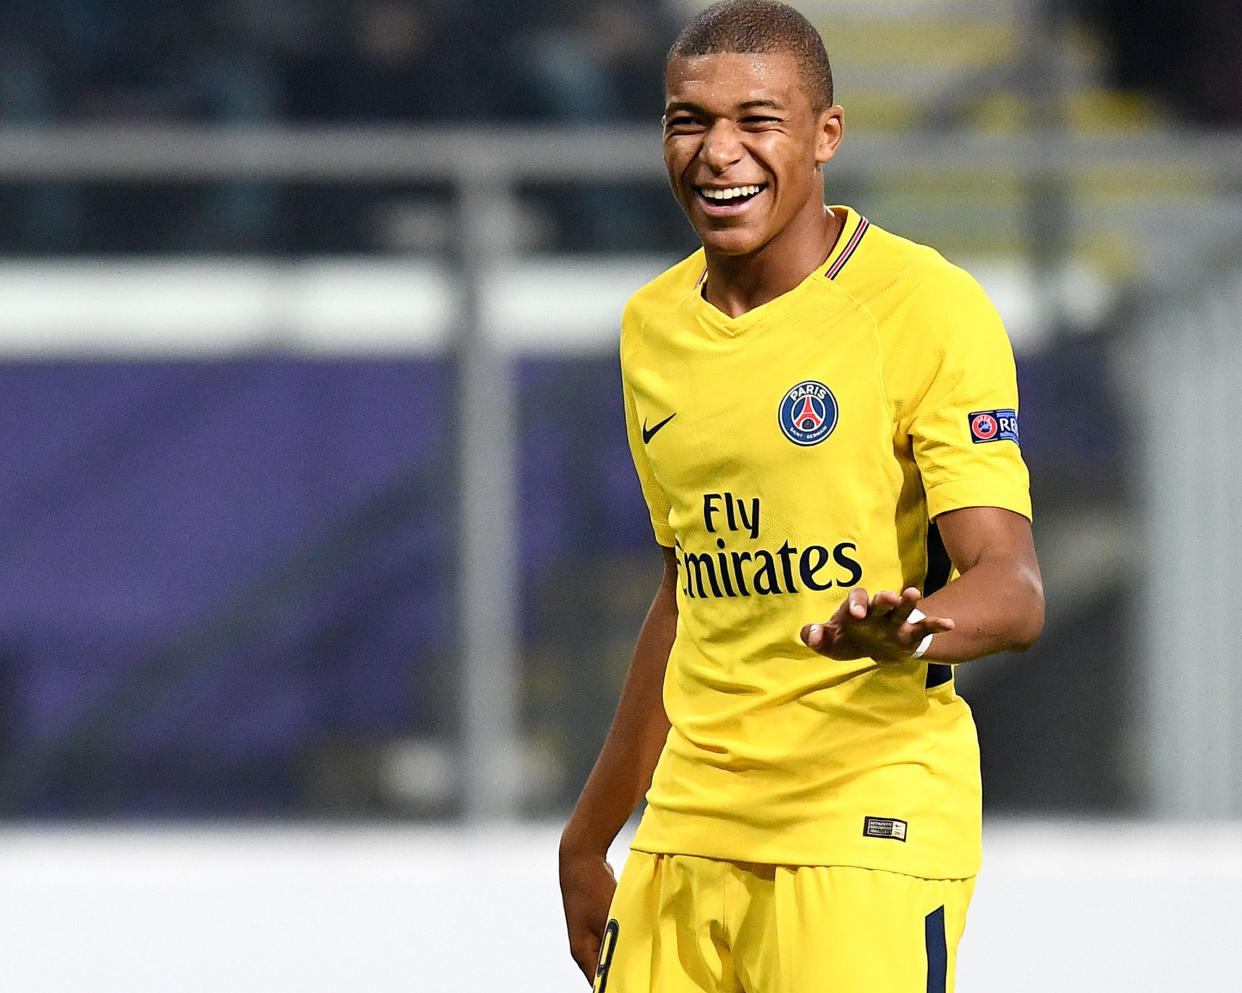 Mbappe won by more than 100 votes: Getty